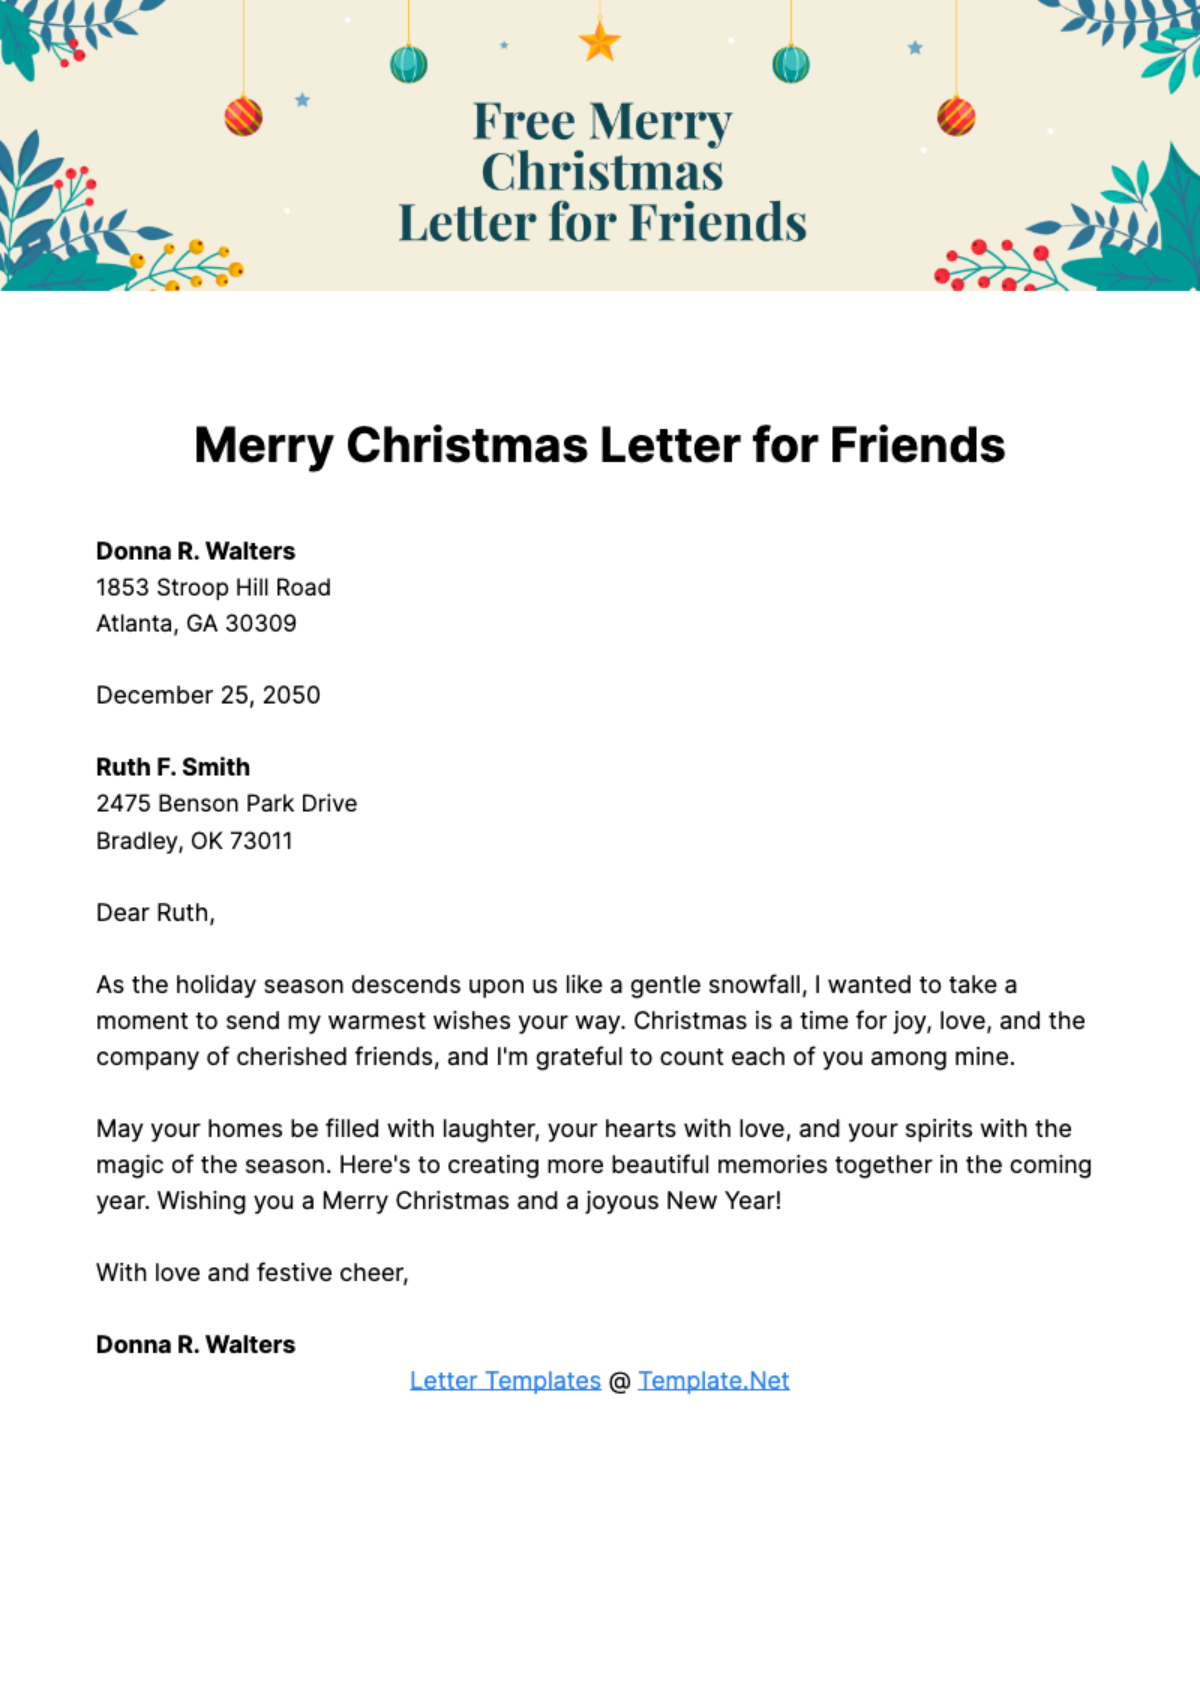 Free Merry Christmas Letter for Friends Template